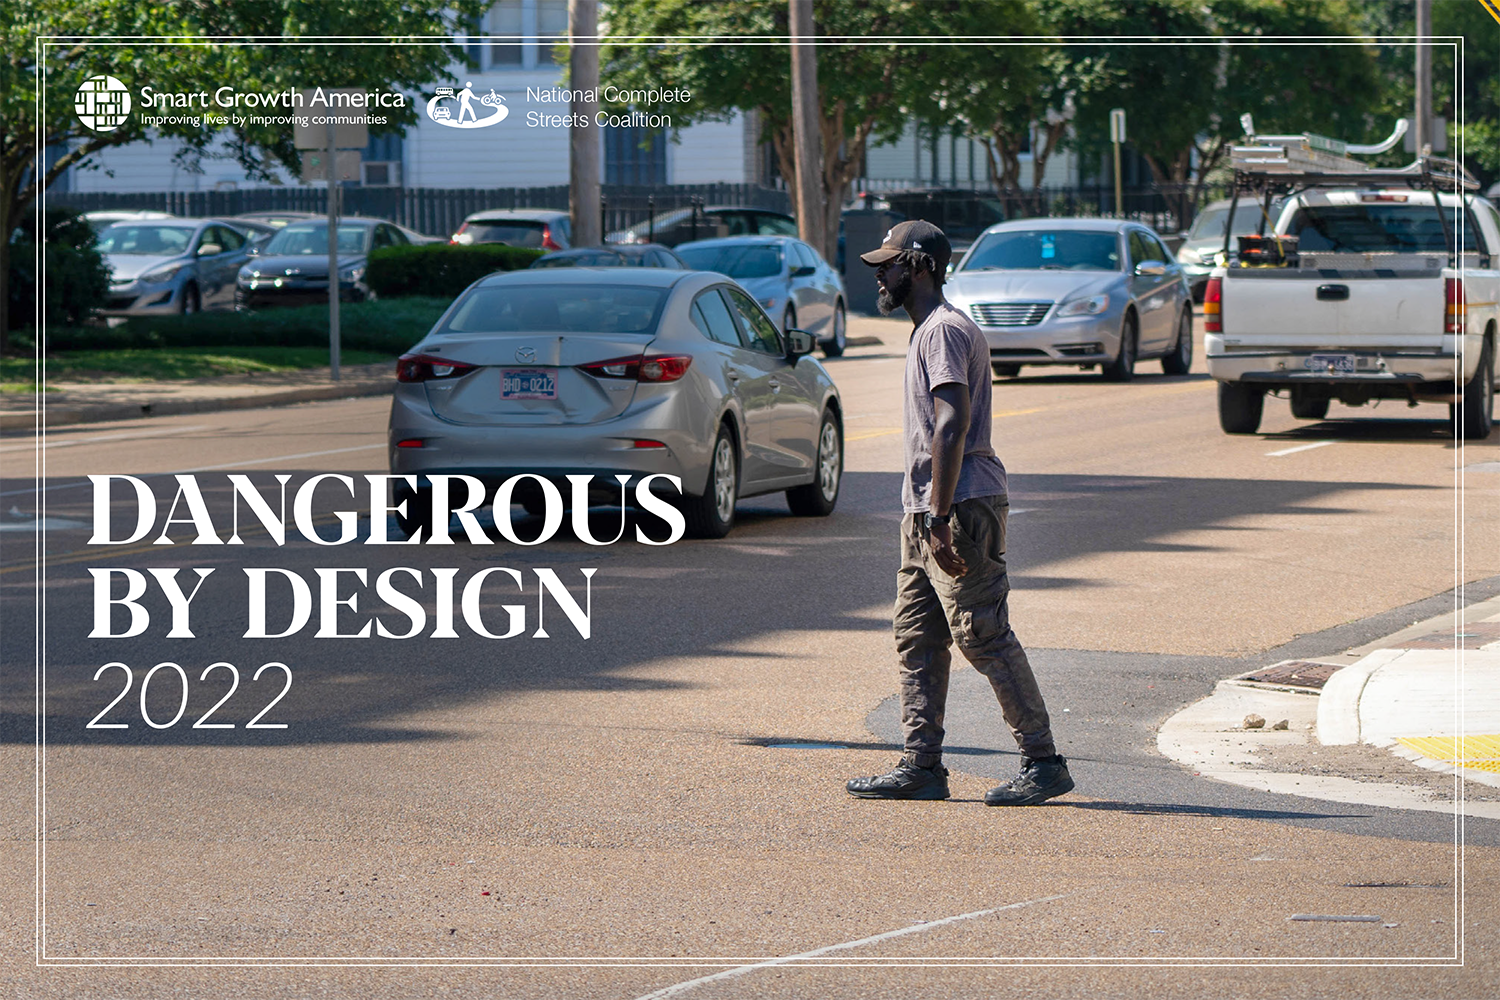 cover image of dangerous by design report. A man steps off a curb in memphis into an arterial road lacking painted crosswalks with heavy traffic passing by